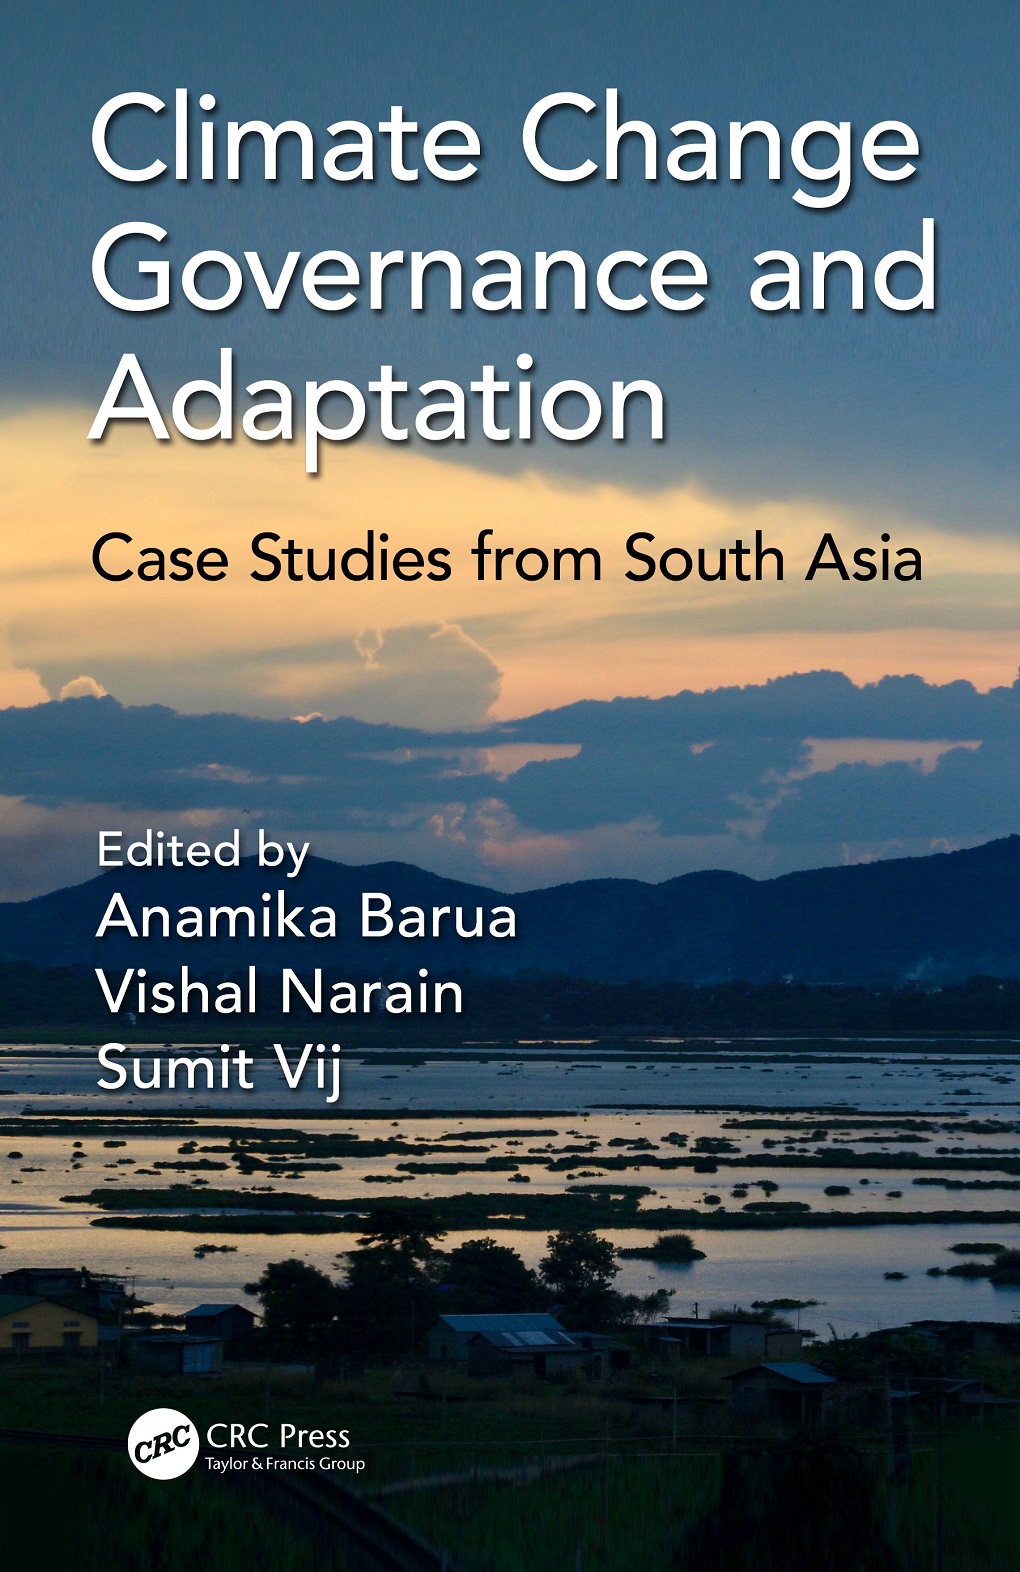 climate change governance and adaptation, case studies from South Asia. 